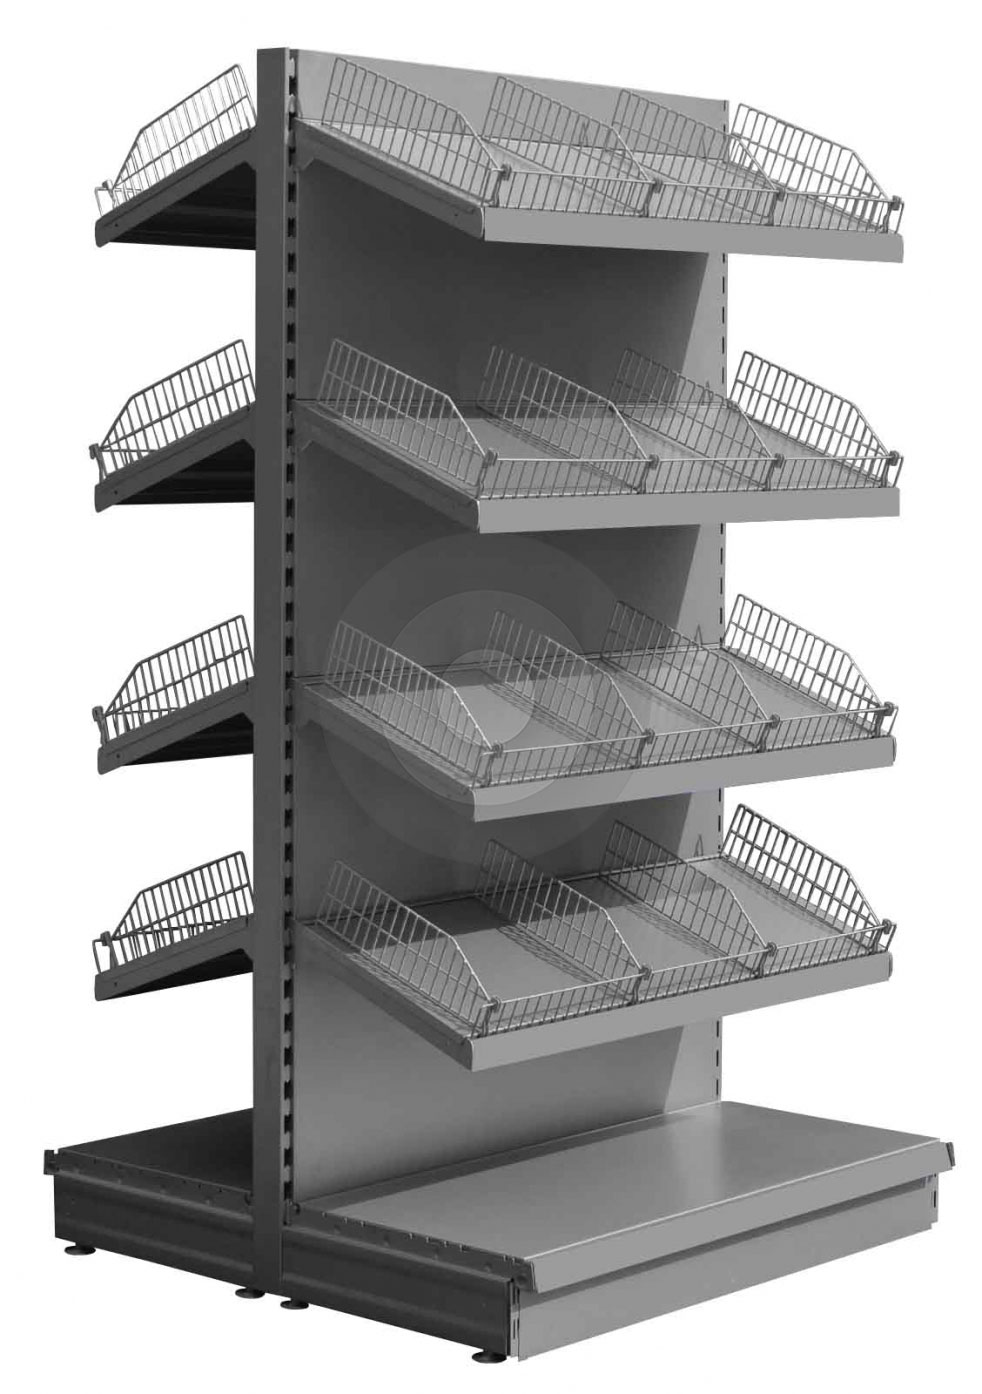 6 1/4 in Overall Depth Silver 24 in Overall Width-204000137 Steel,Shelf Divider